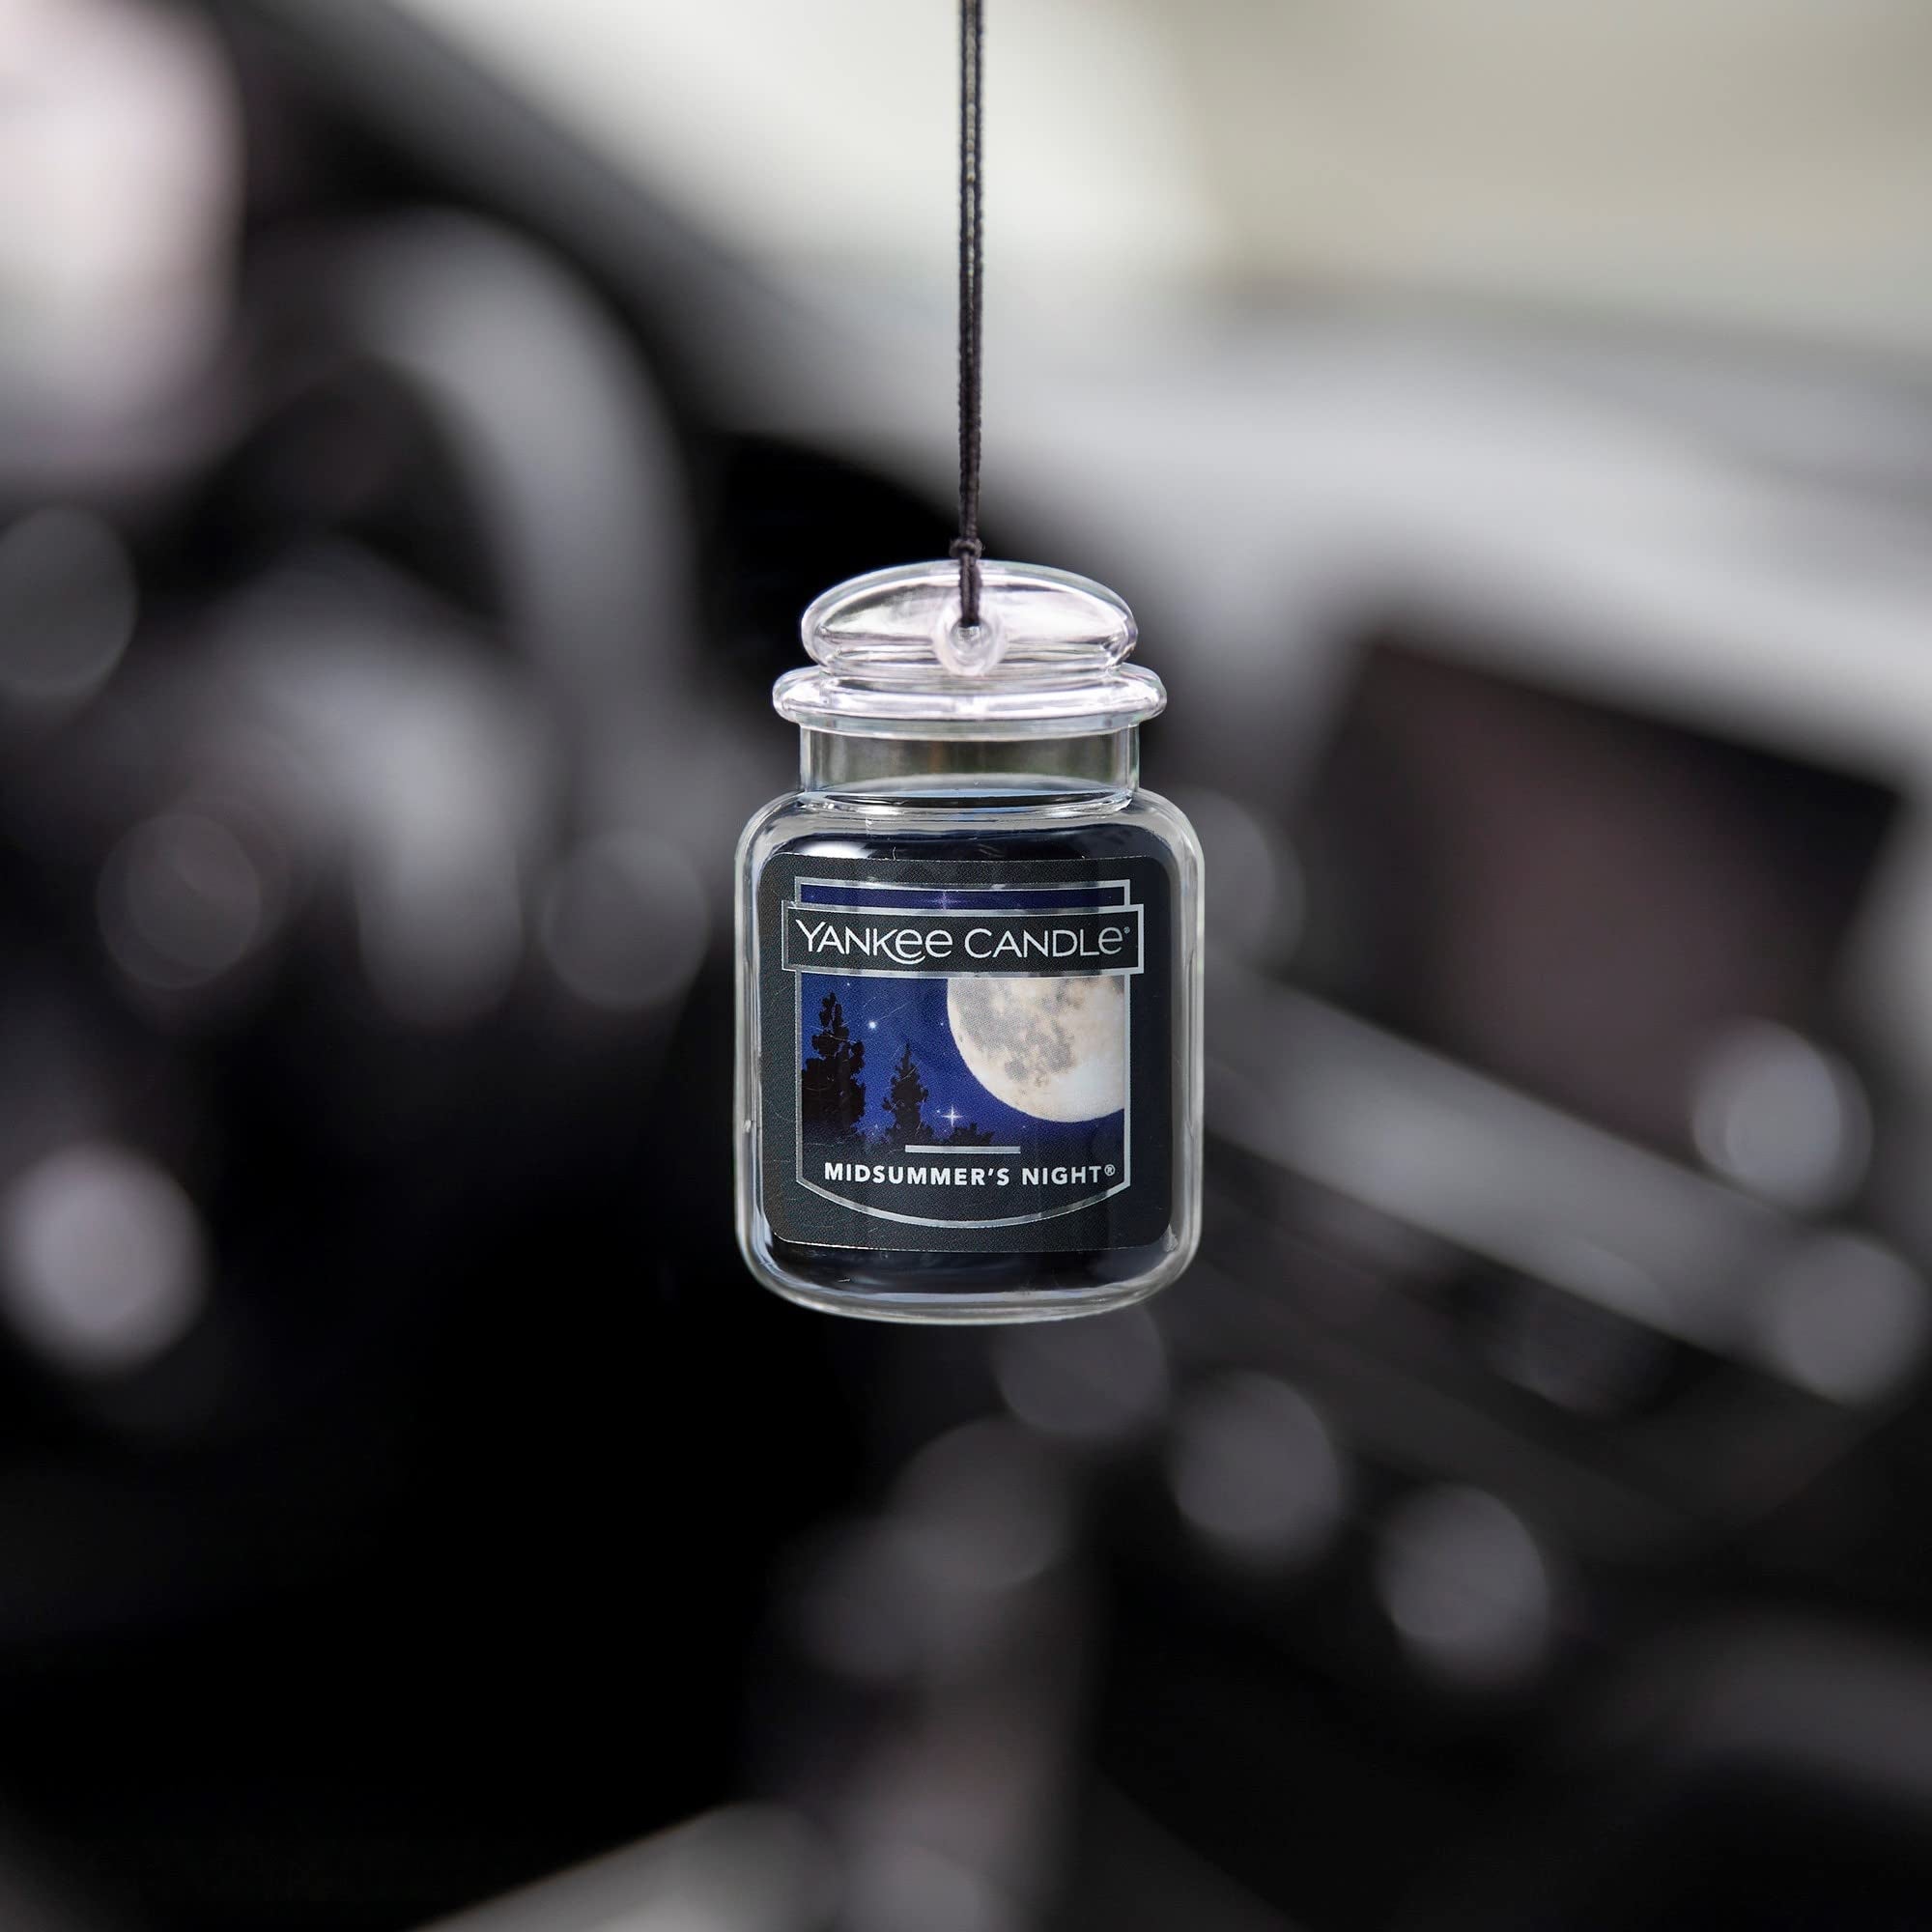 Top Tips for Choosing a Car Fragrance-Candles2go